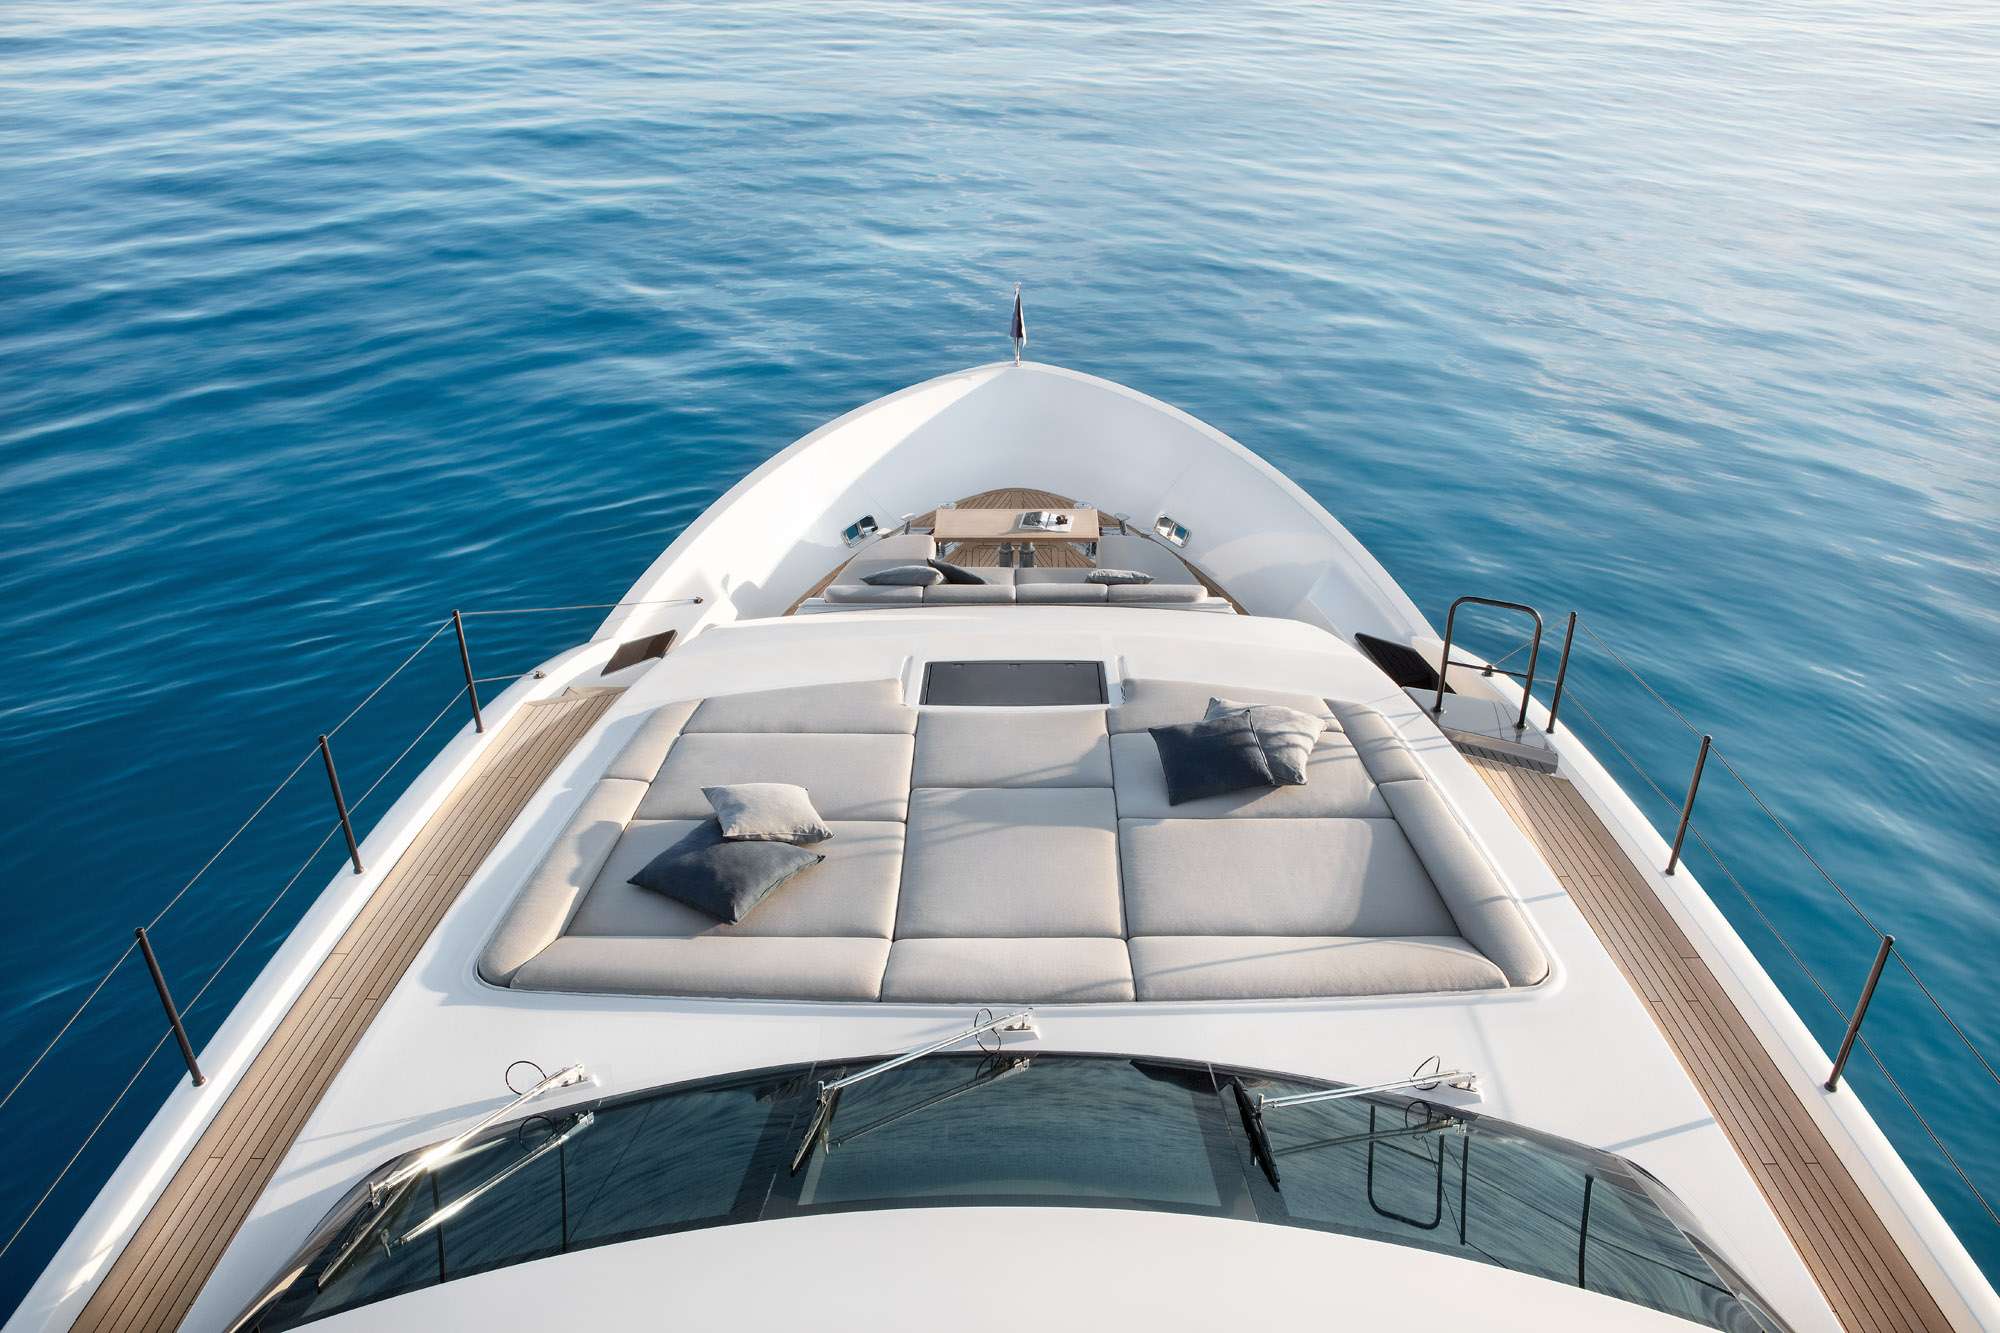 SEVEN - Yacht Charter Roses & Boat hire in Balearics & Spain 6